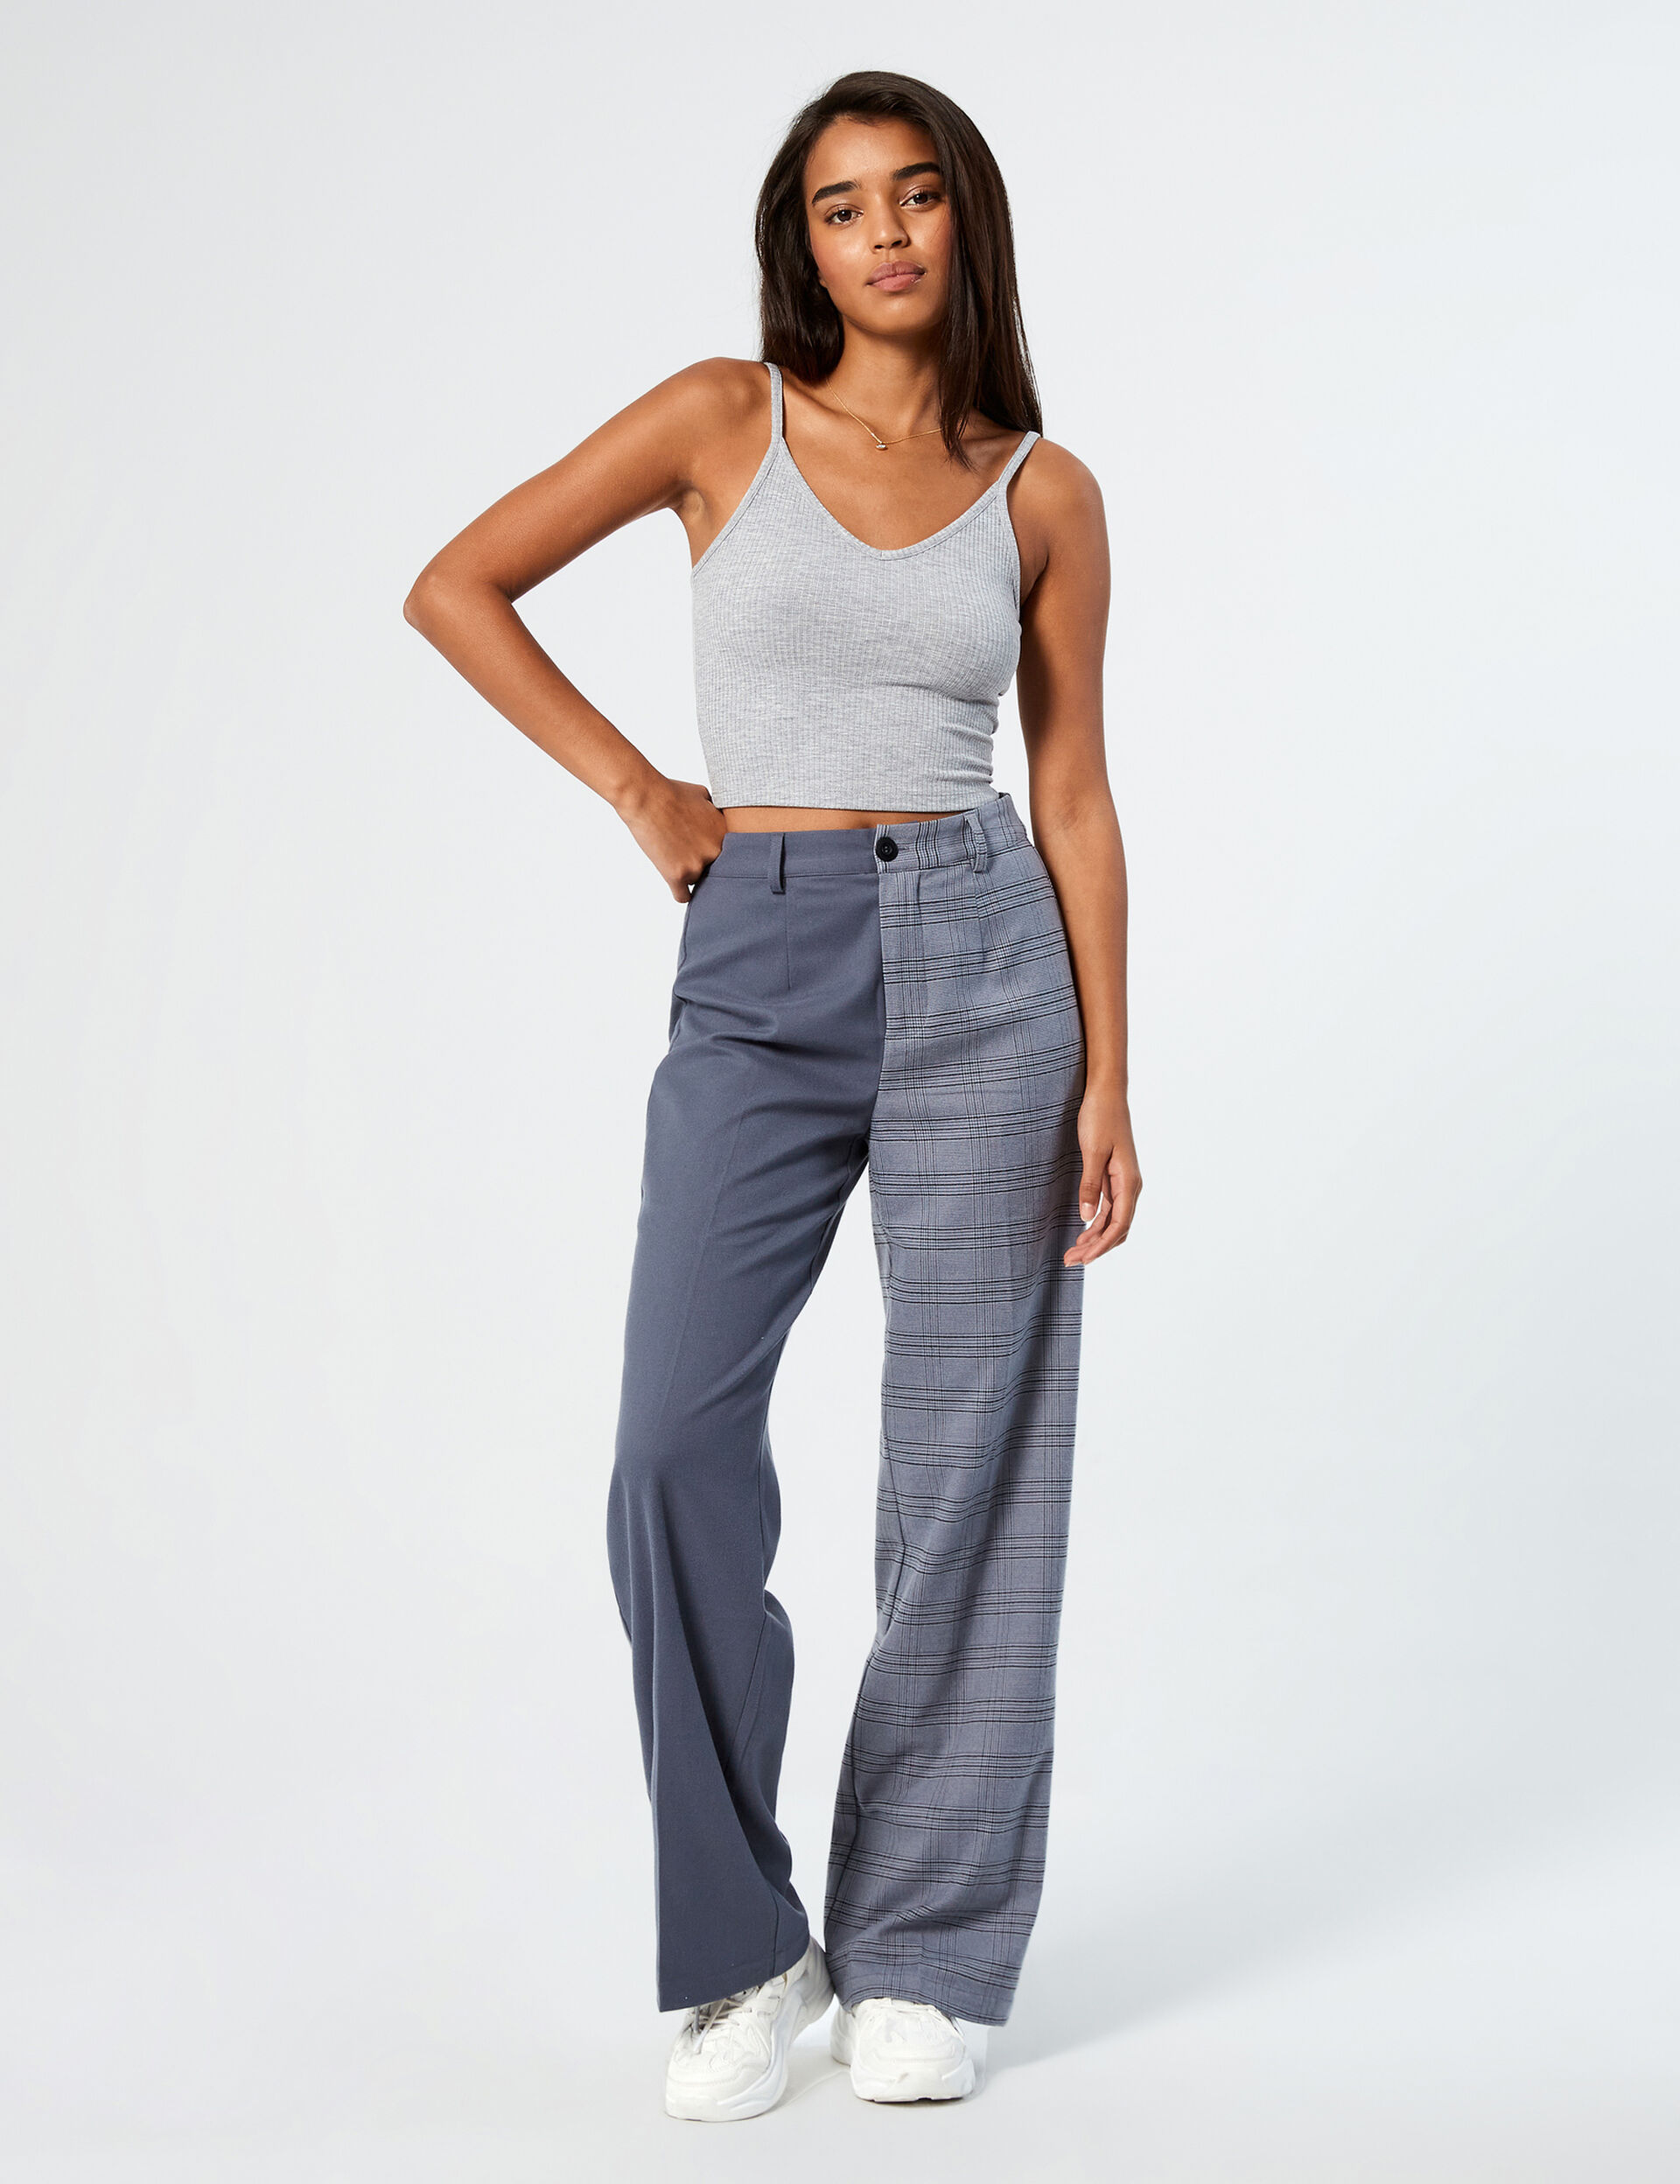 Patterned and plain palazzo trousers